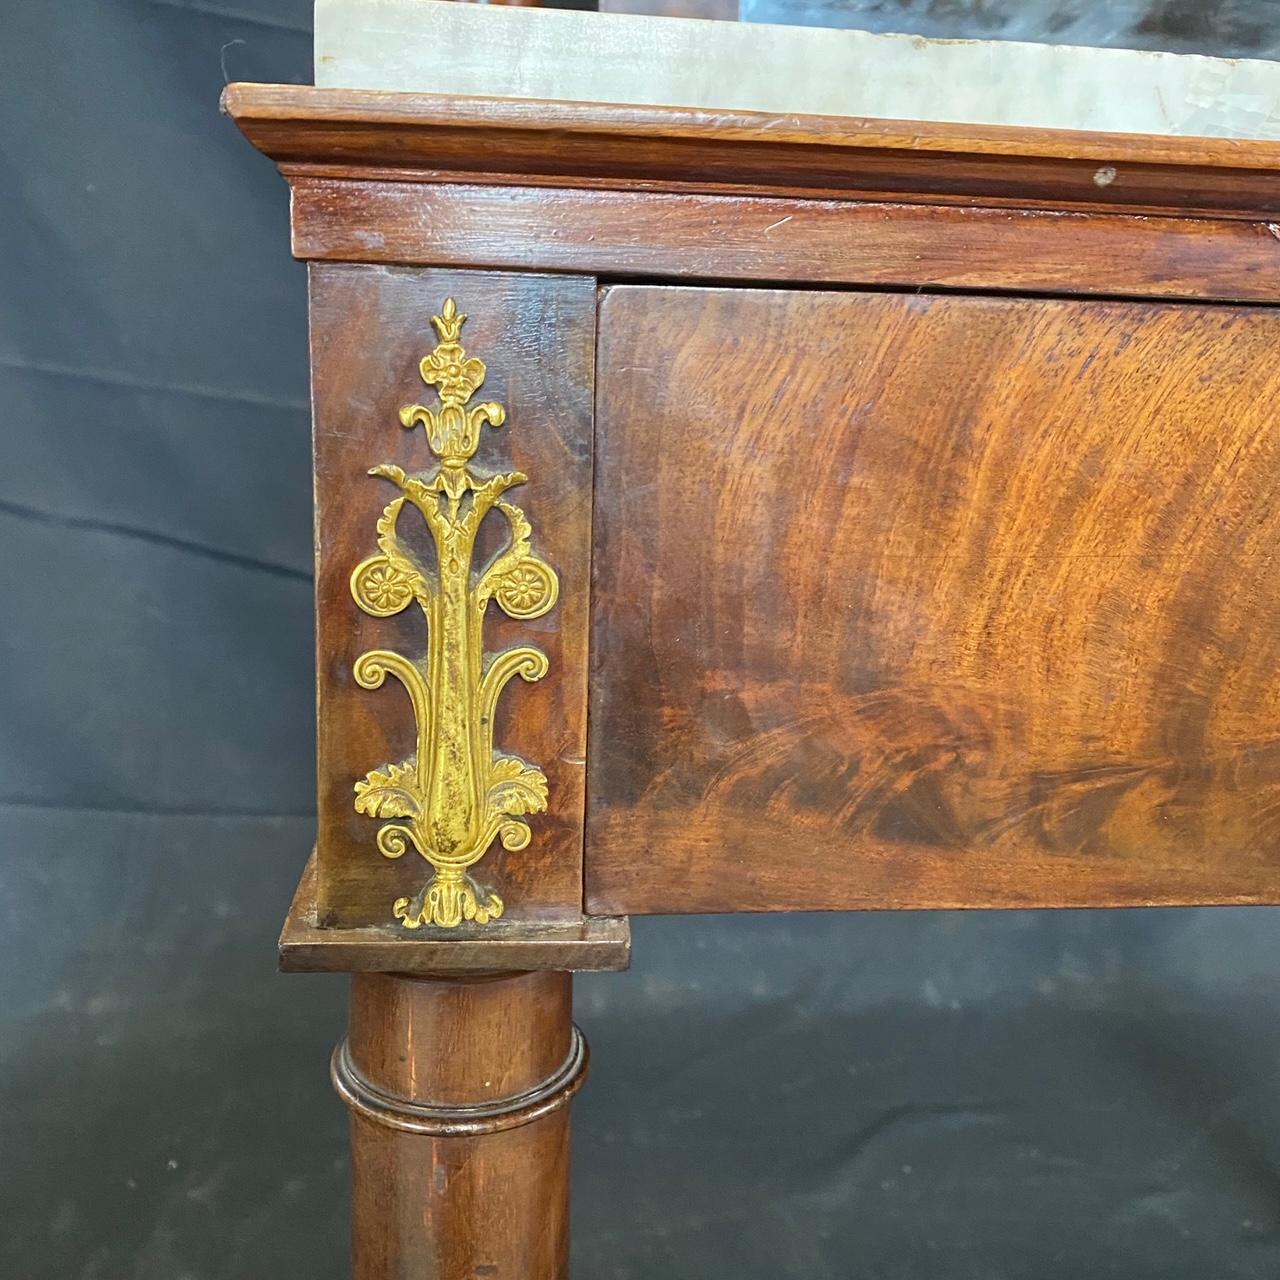 Elegant French 19th Century Empire Vanity with Original Marble Top For Sale 6